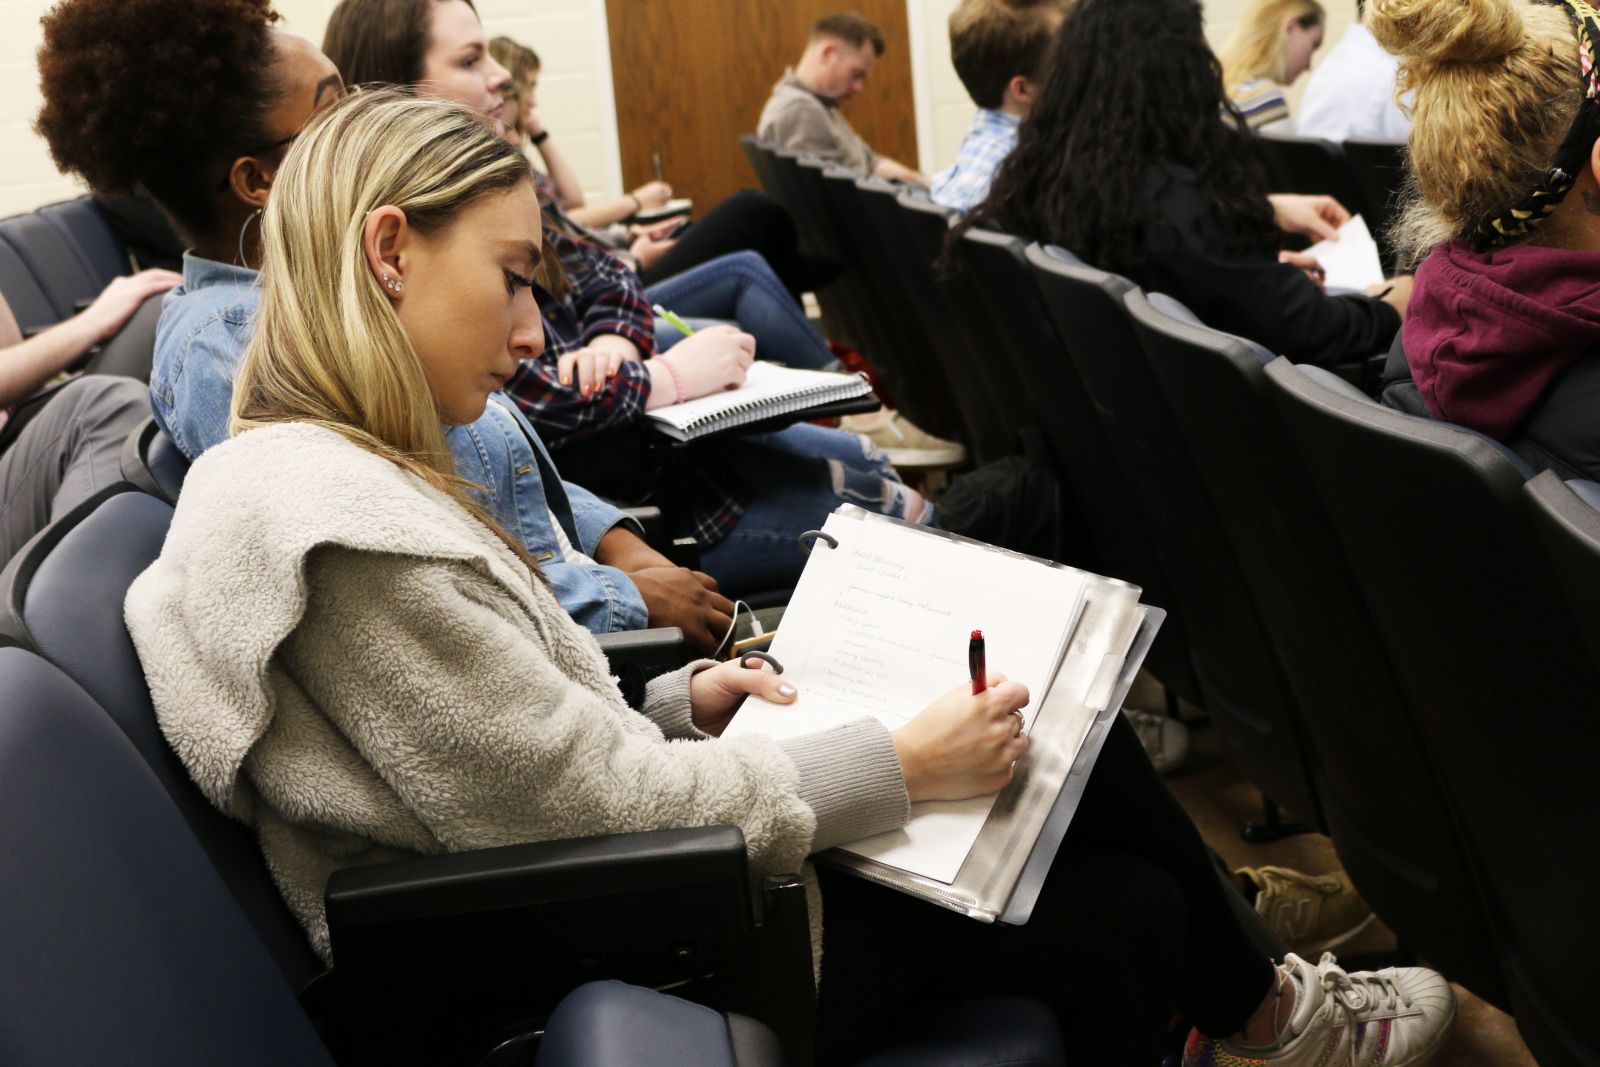 A UMD student takes notes during a lecture 